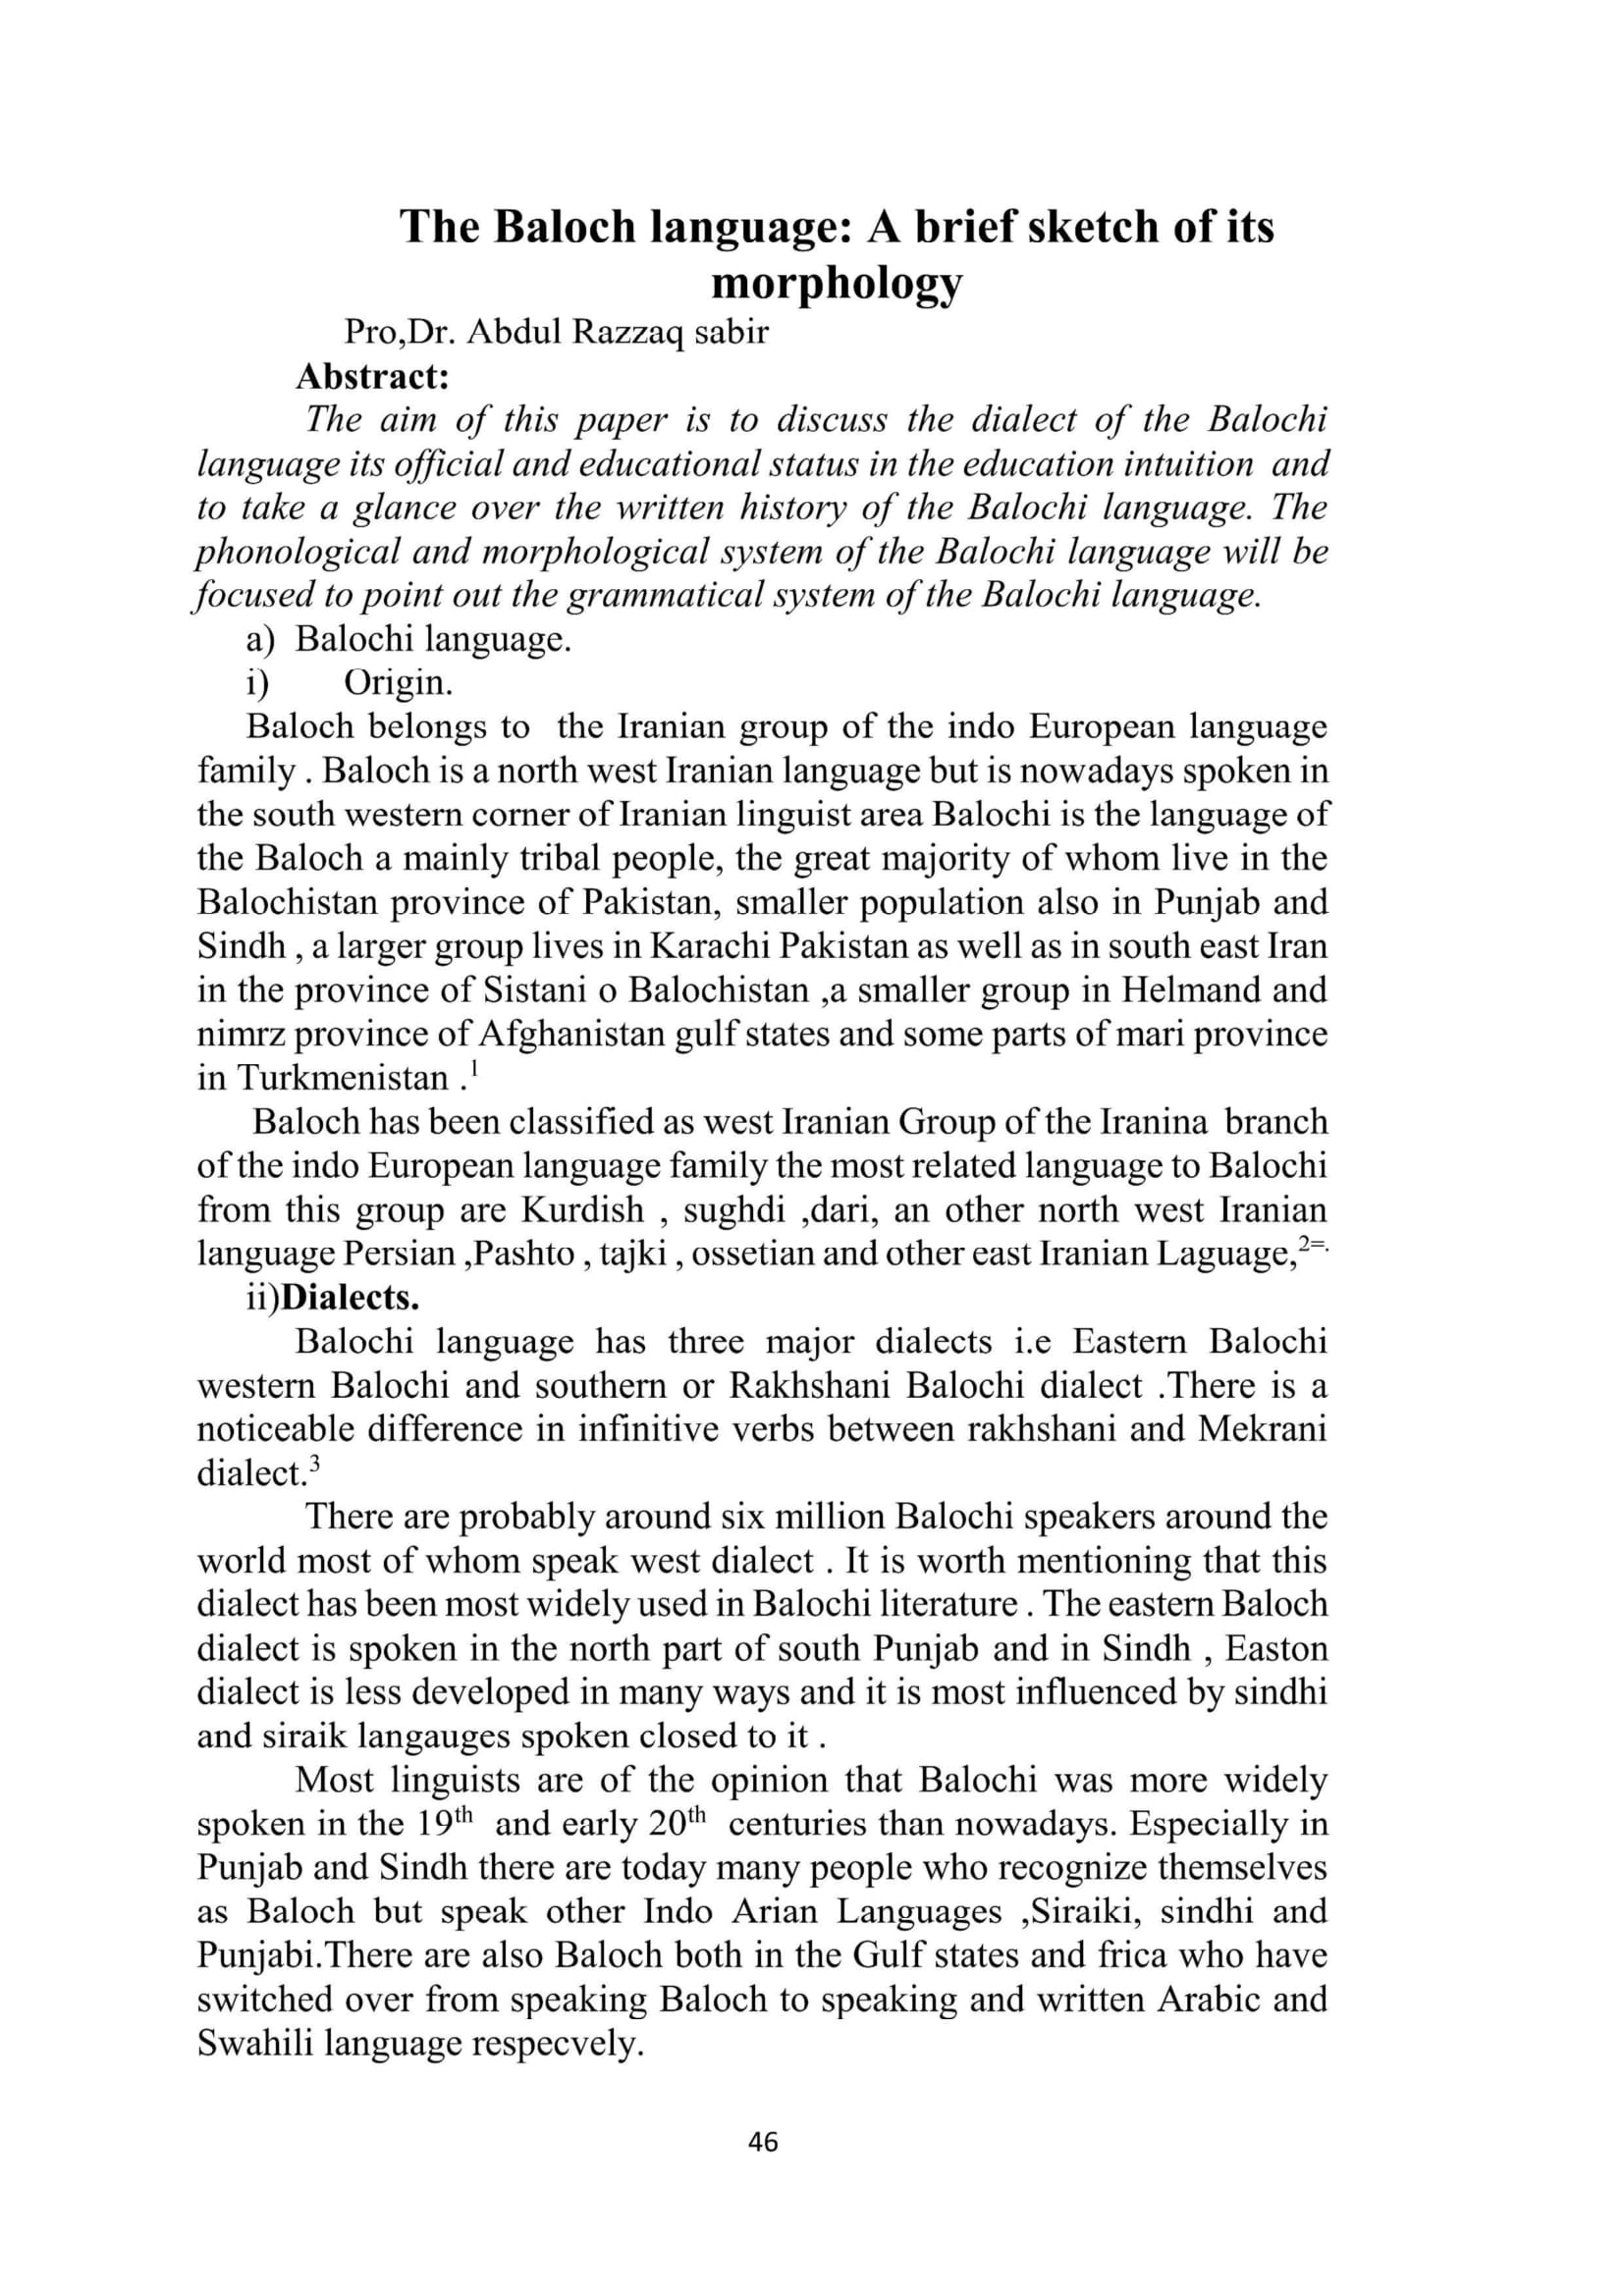 The Baloch language: A brief sketch of its morphology